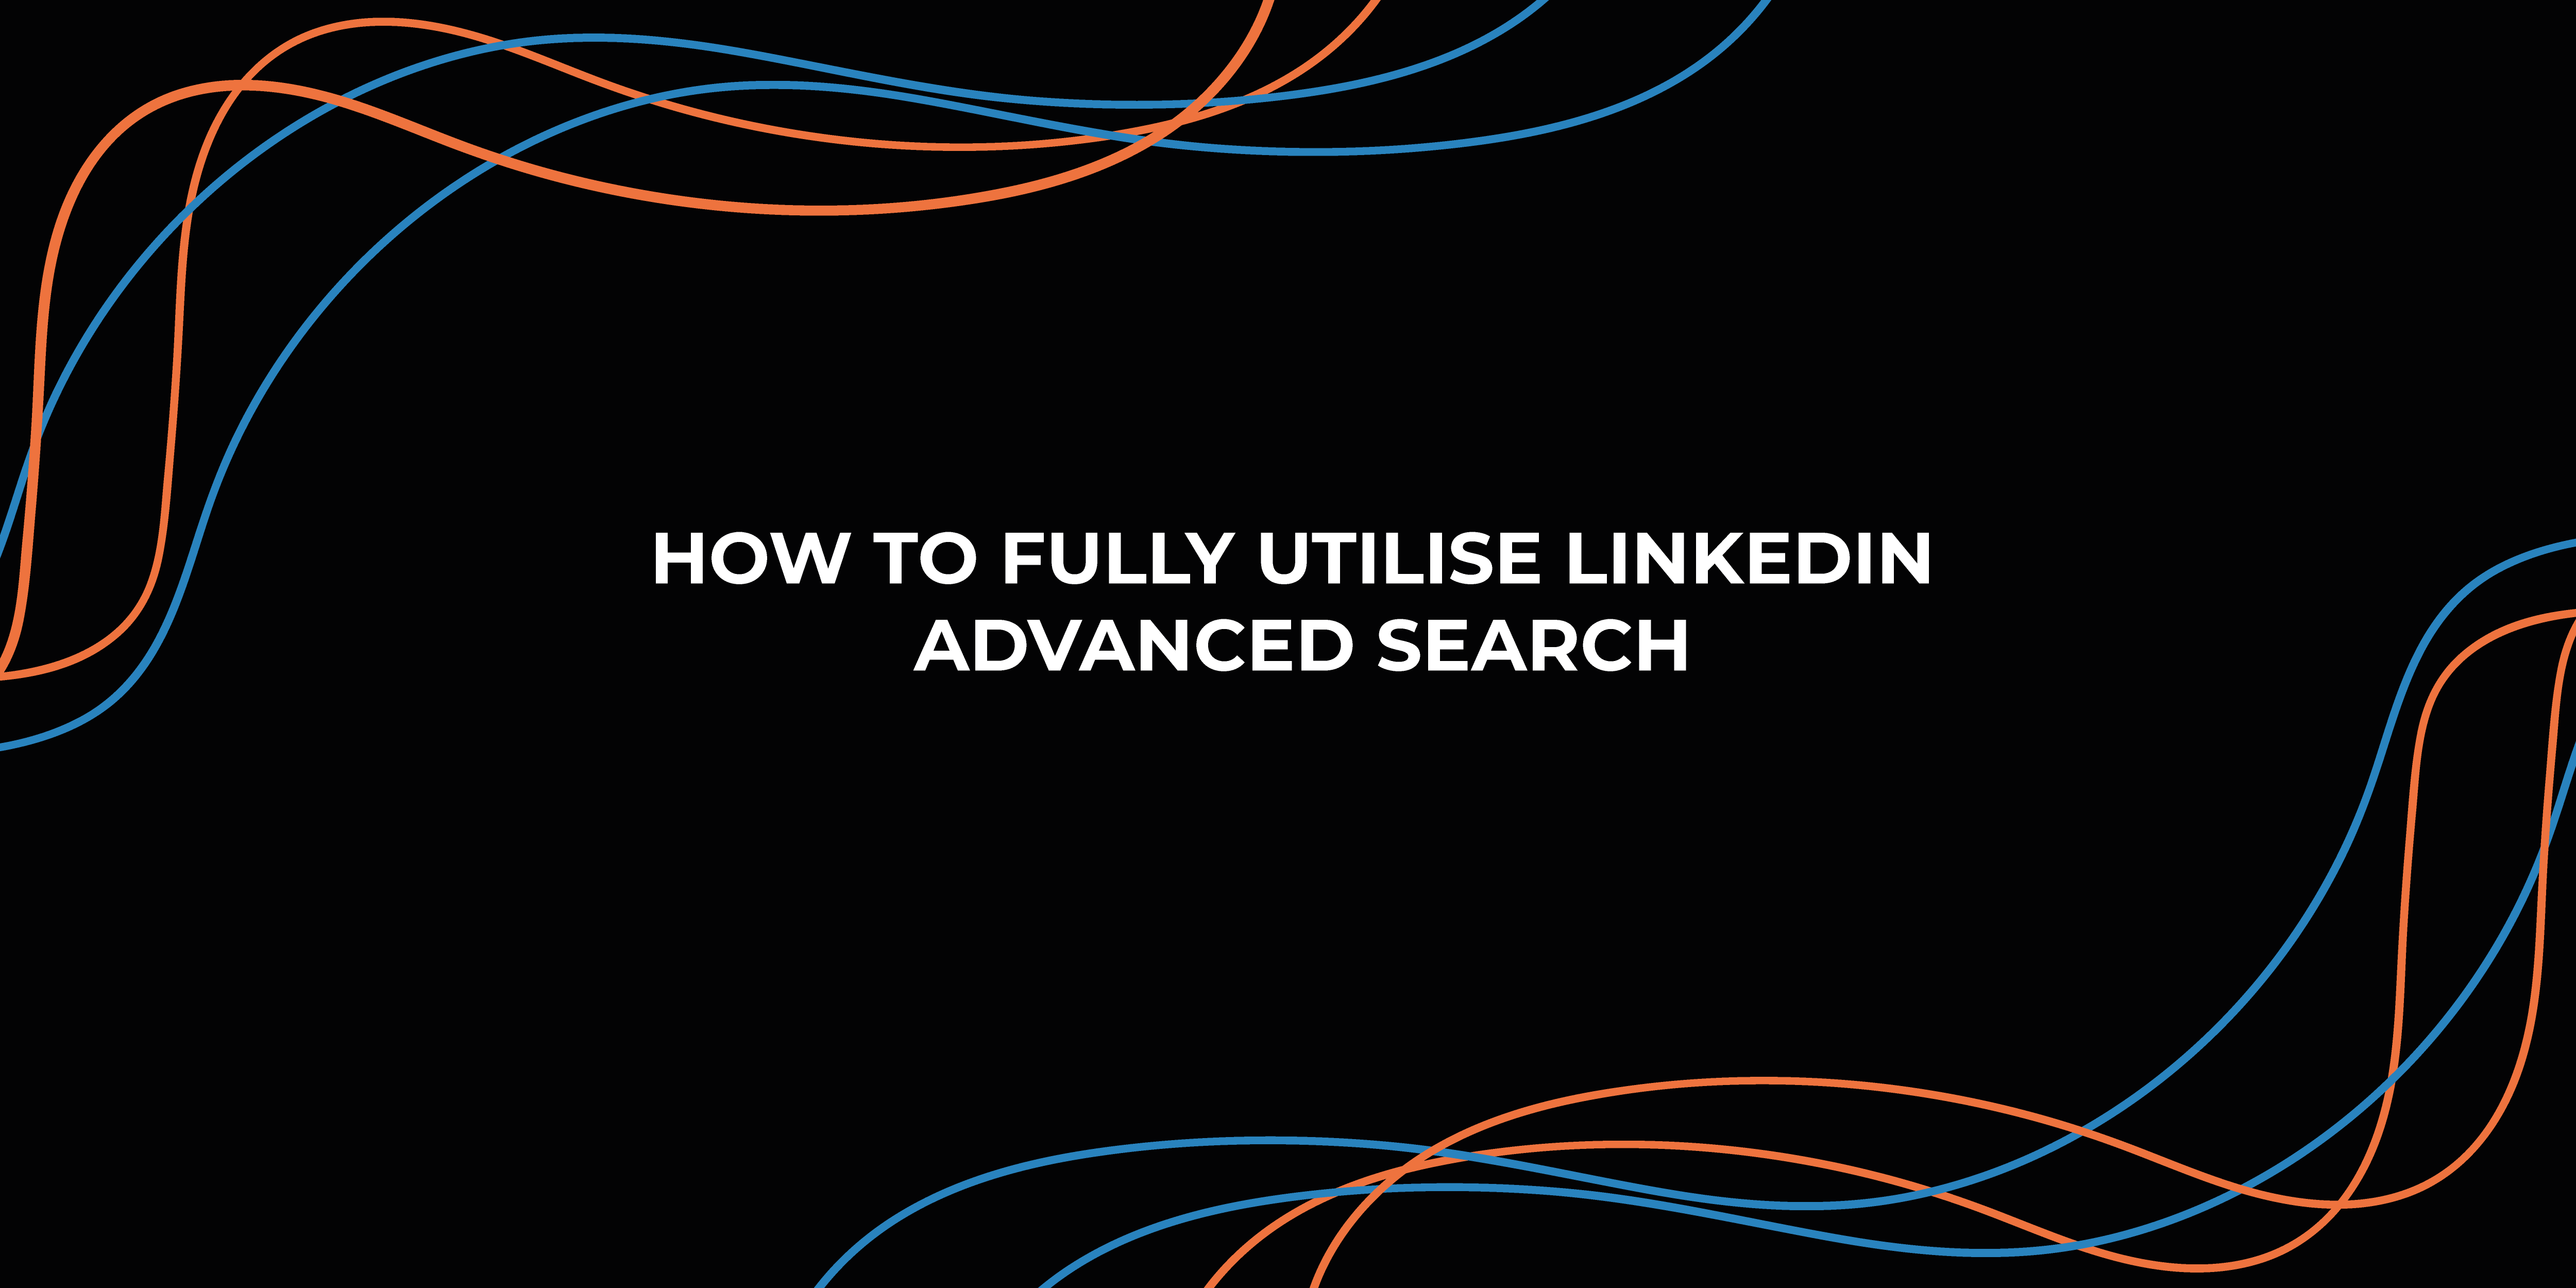 How to Fully Utilise LinkedIn Advanced Search